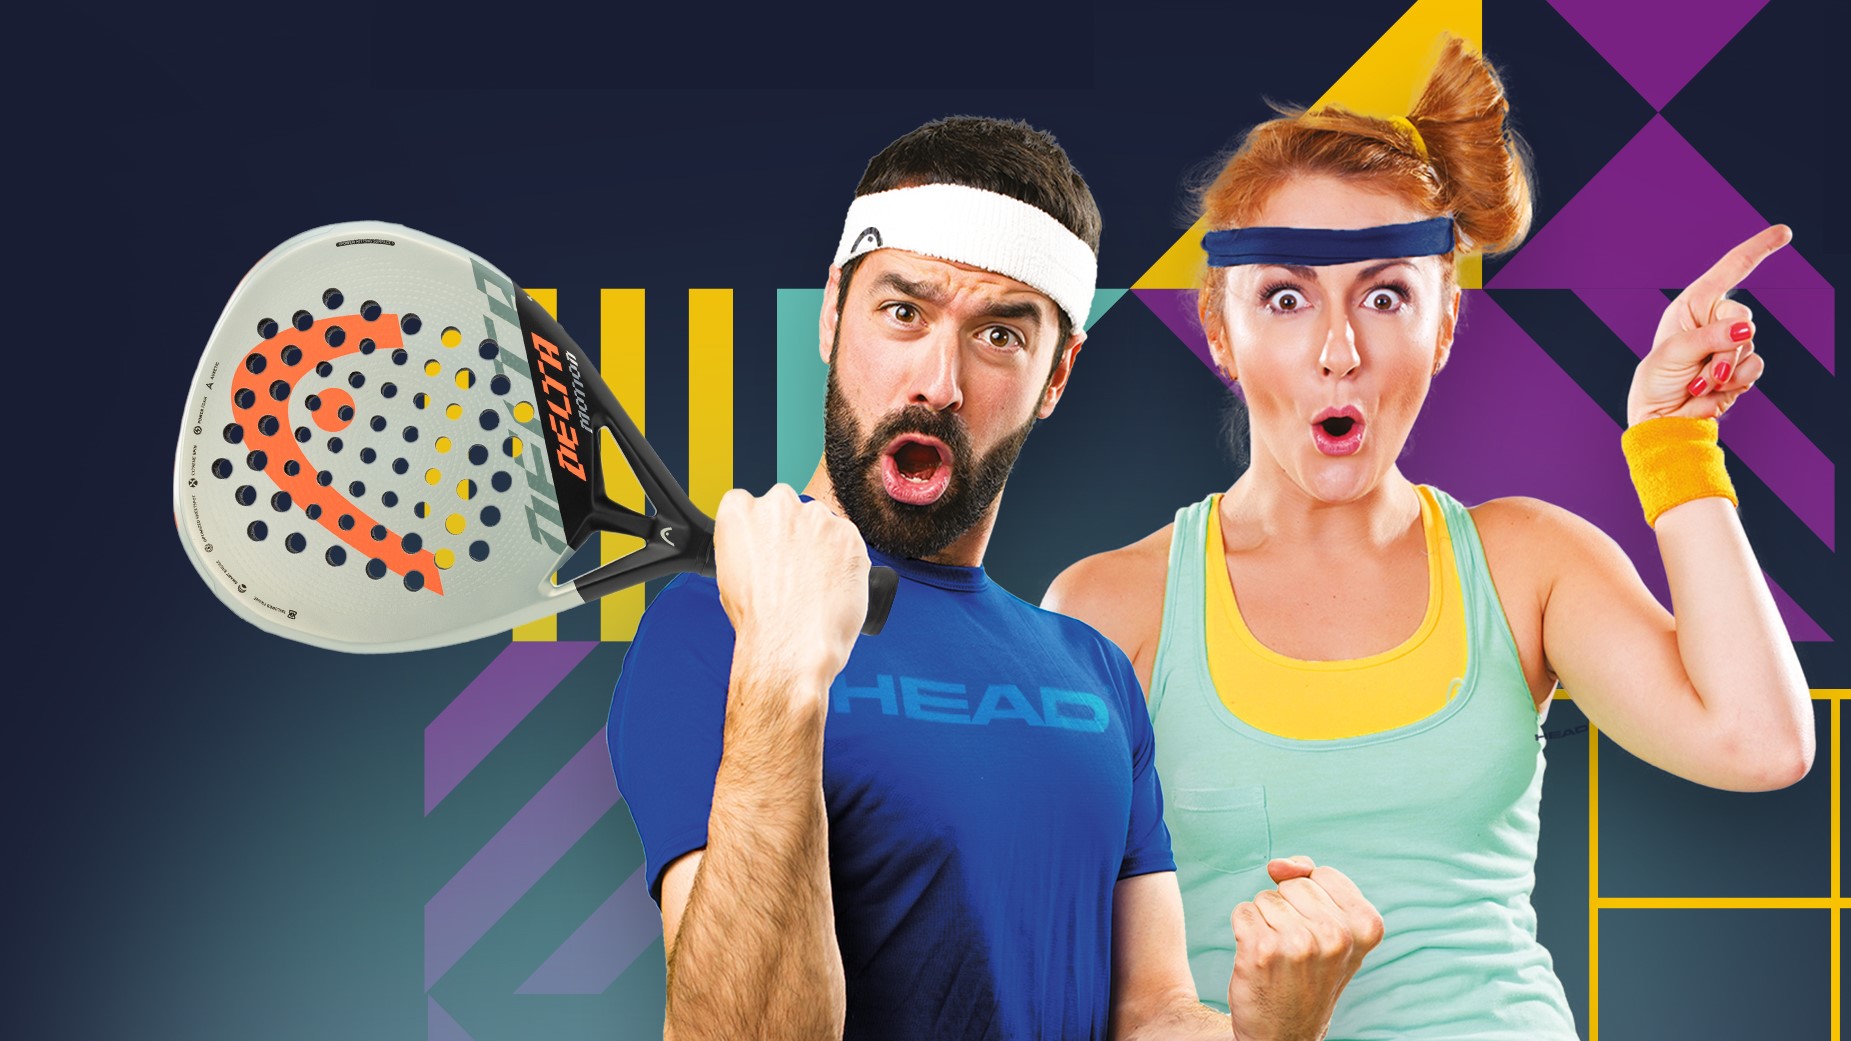 The 2022 edition of the Head Padel Open approaching !